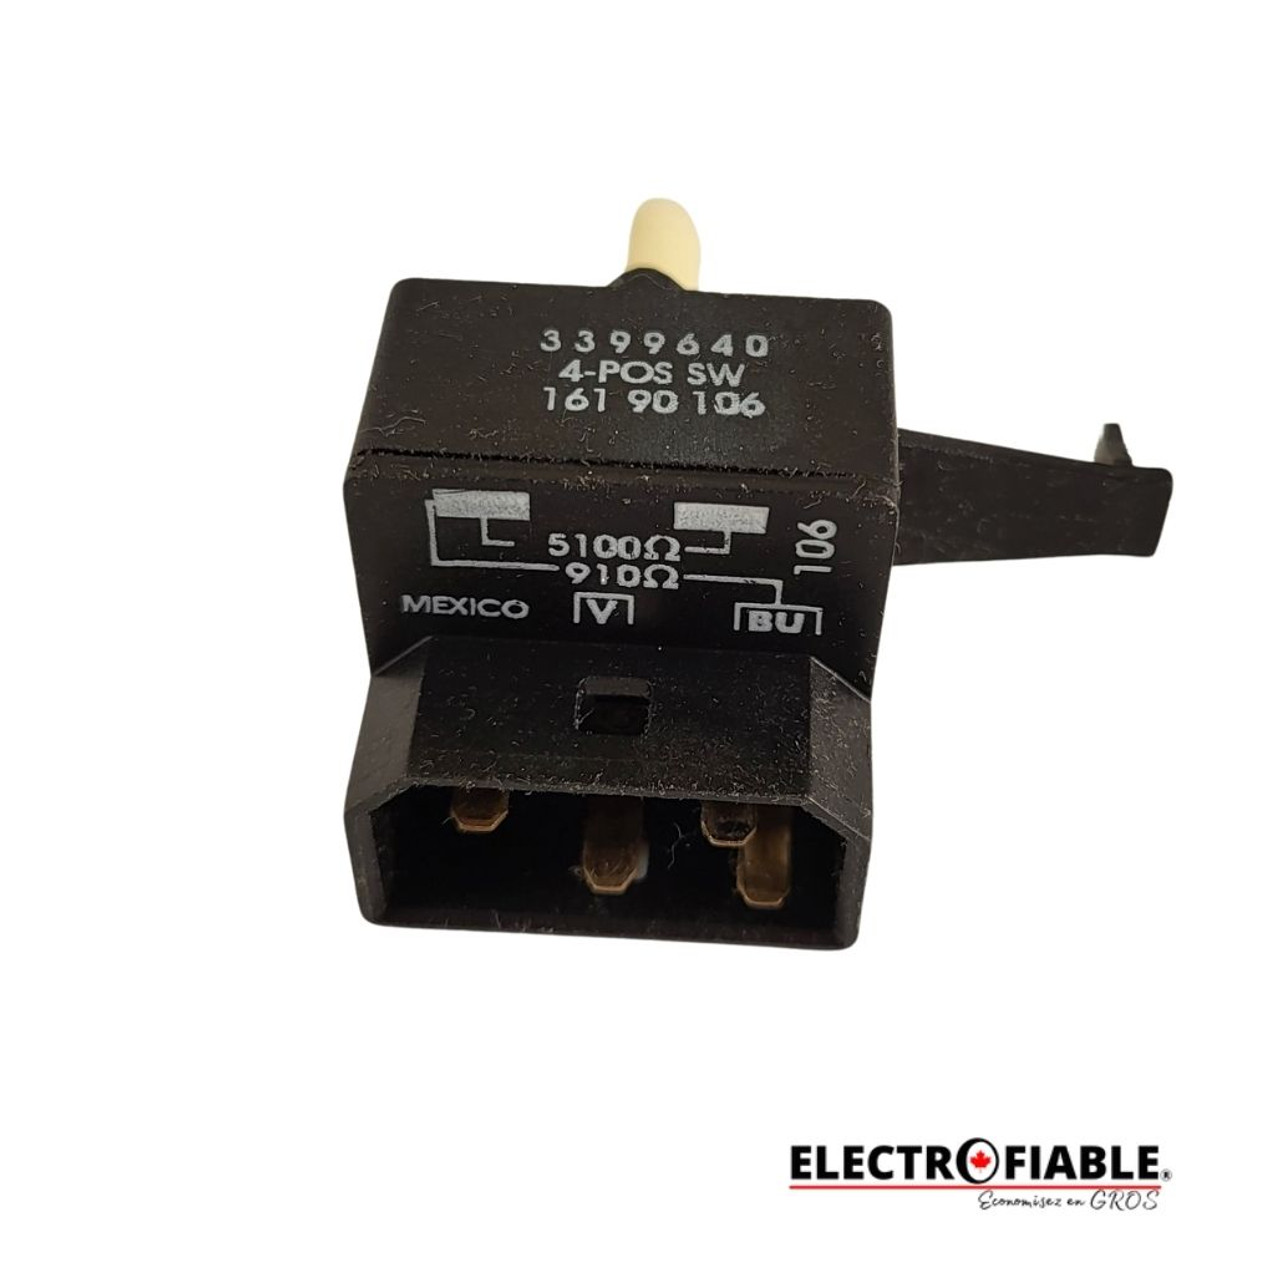 3399640 Temperature switch for Whirlpool dryer